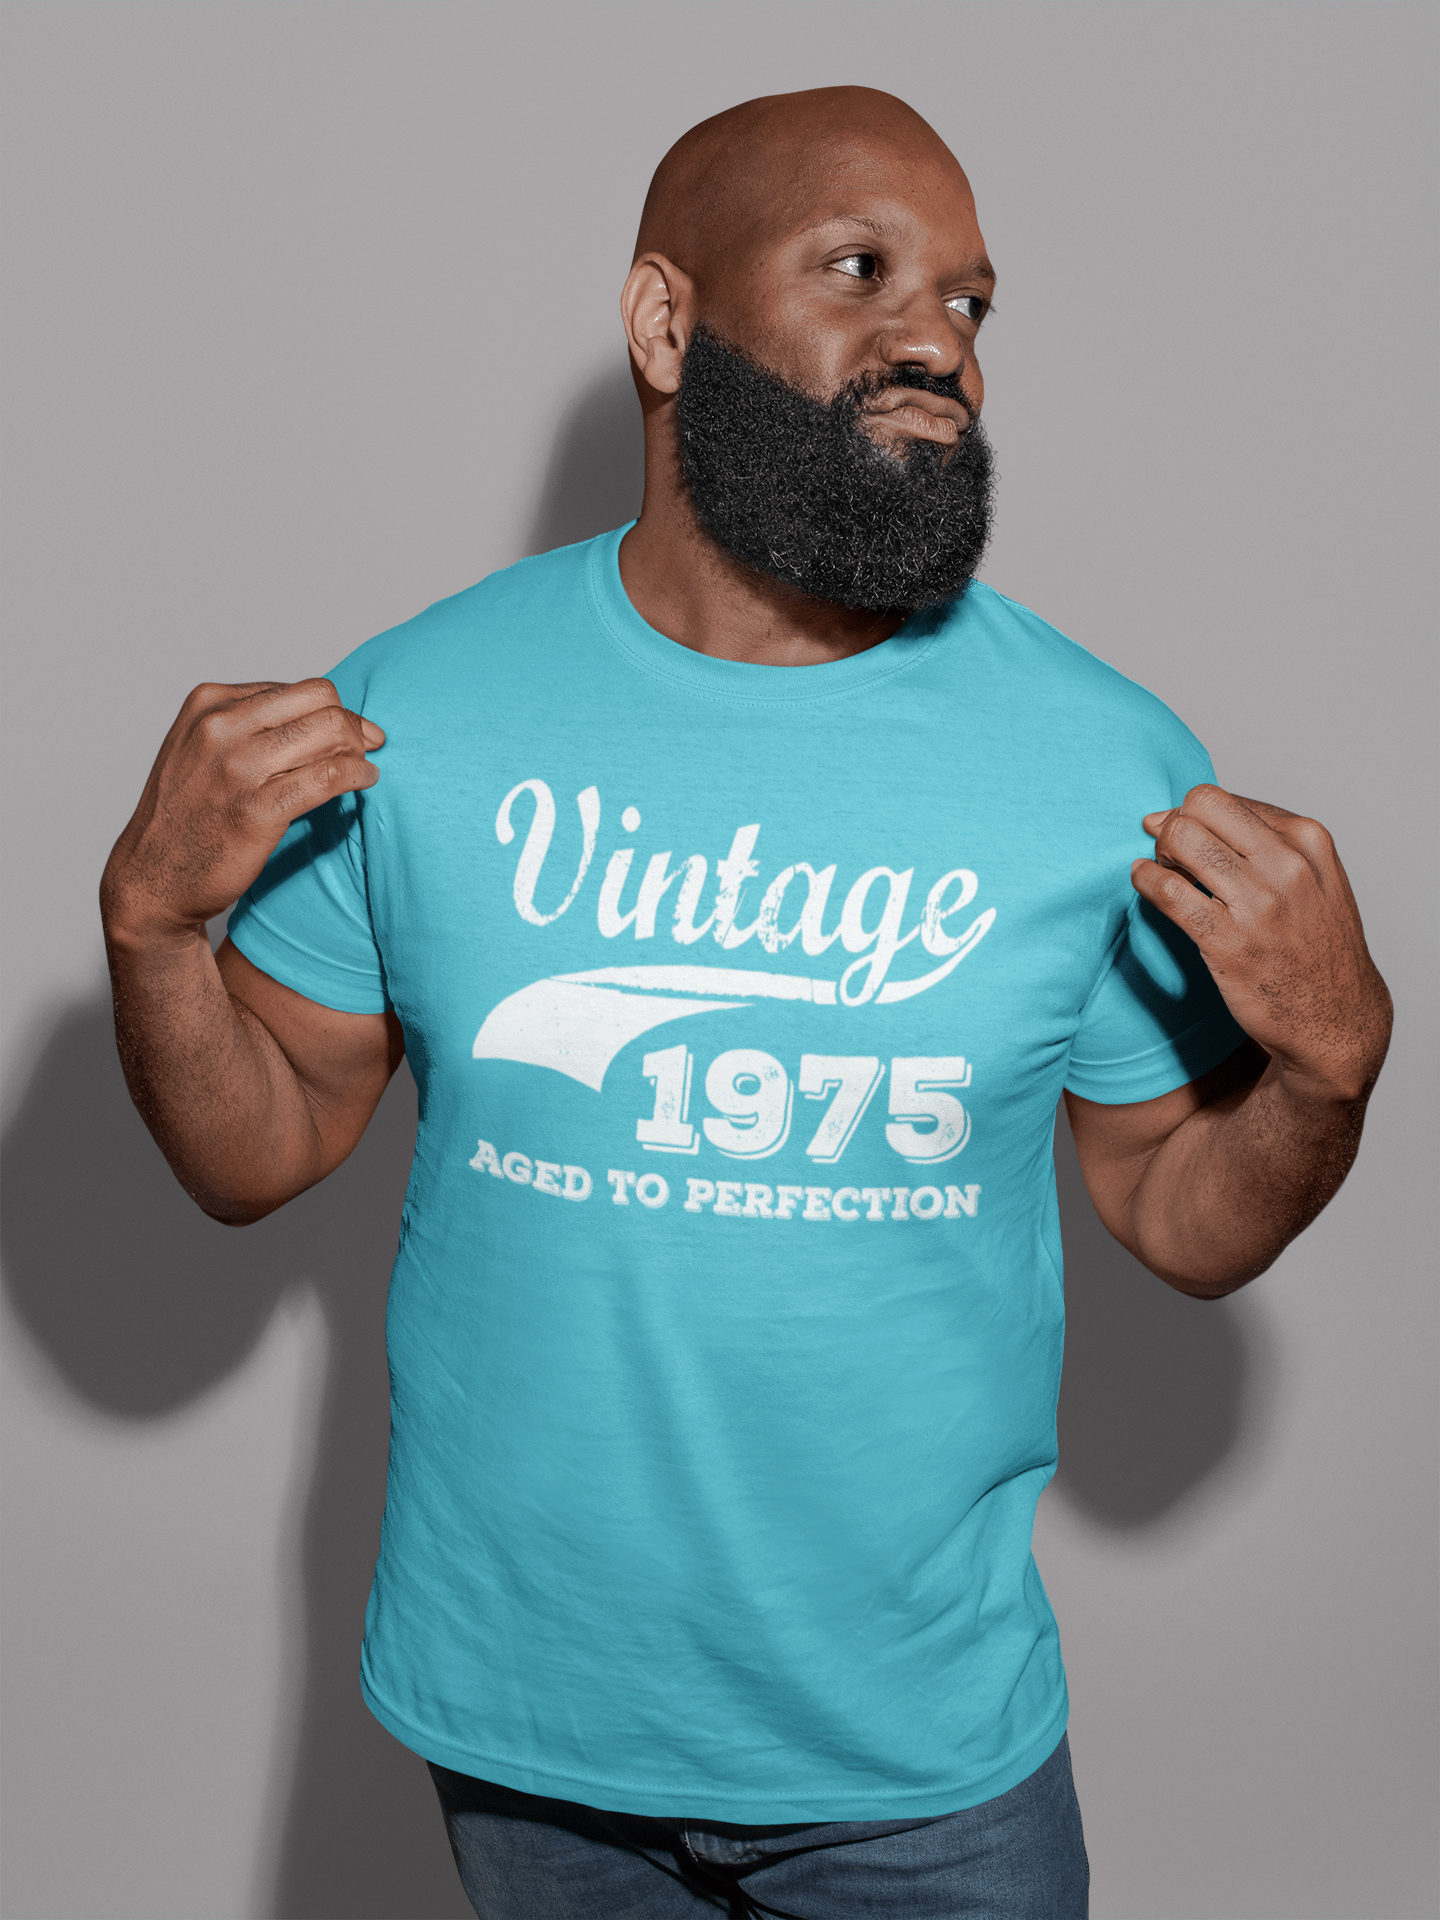 1975 Vintage Aged to Perfection, Blue, Men's Short Sleeve Round Neck T-shirt 00291